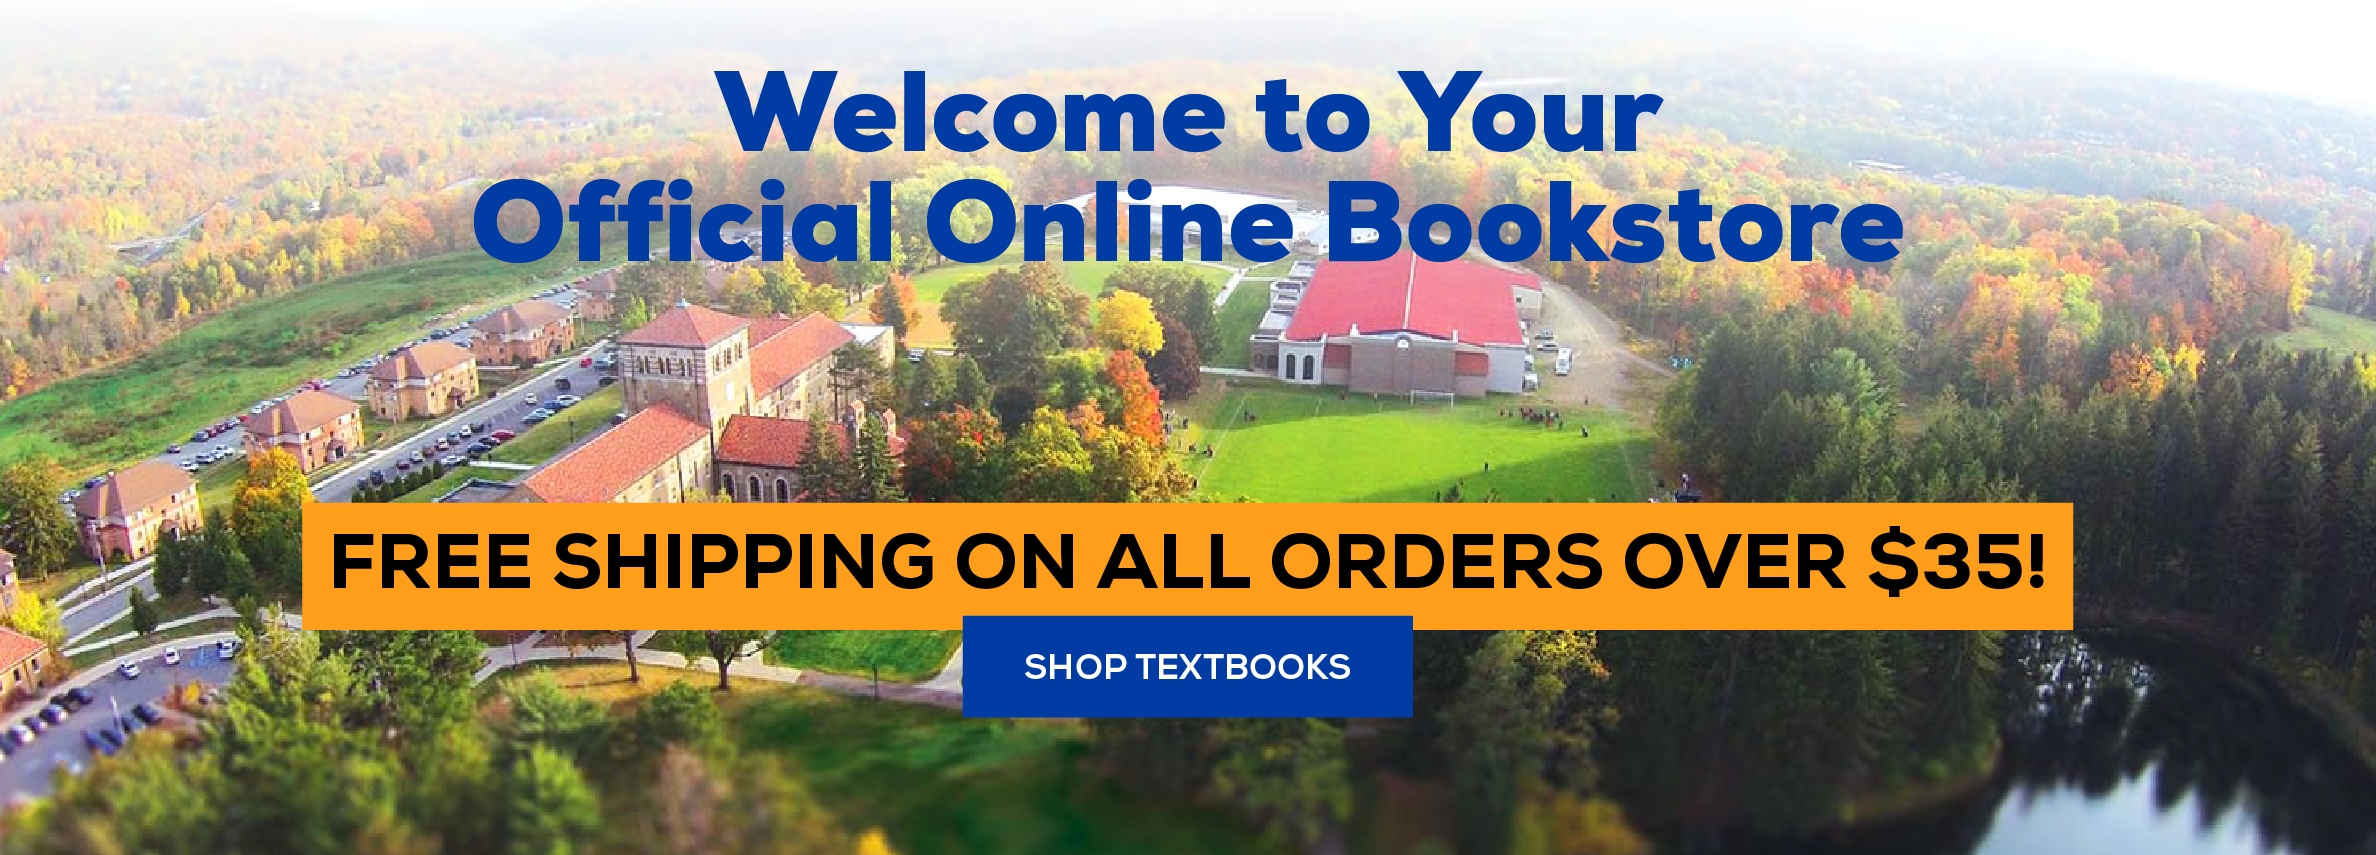 Welcome to your official online bookstore. Free shipping on all orders over $35. Shop Textbooks